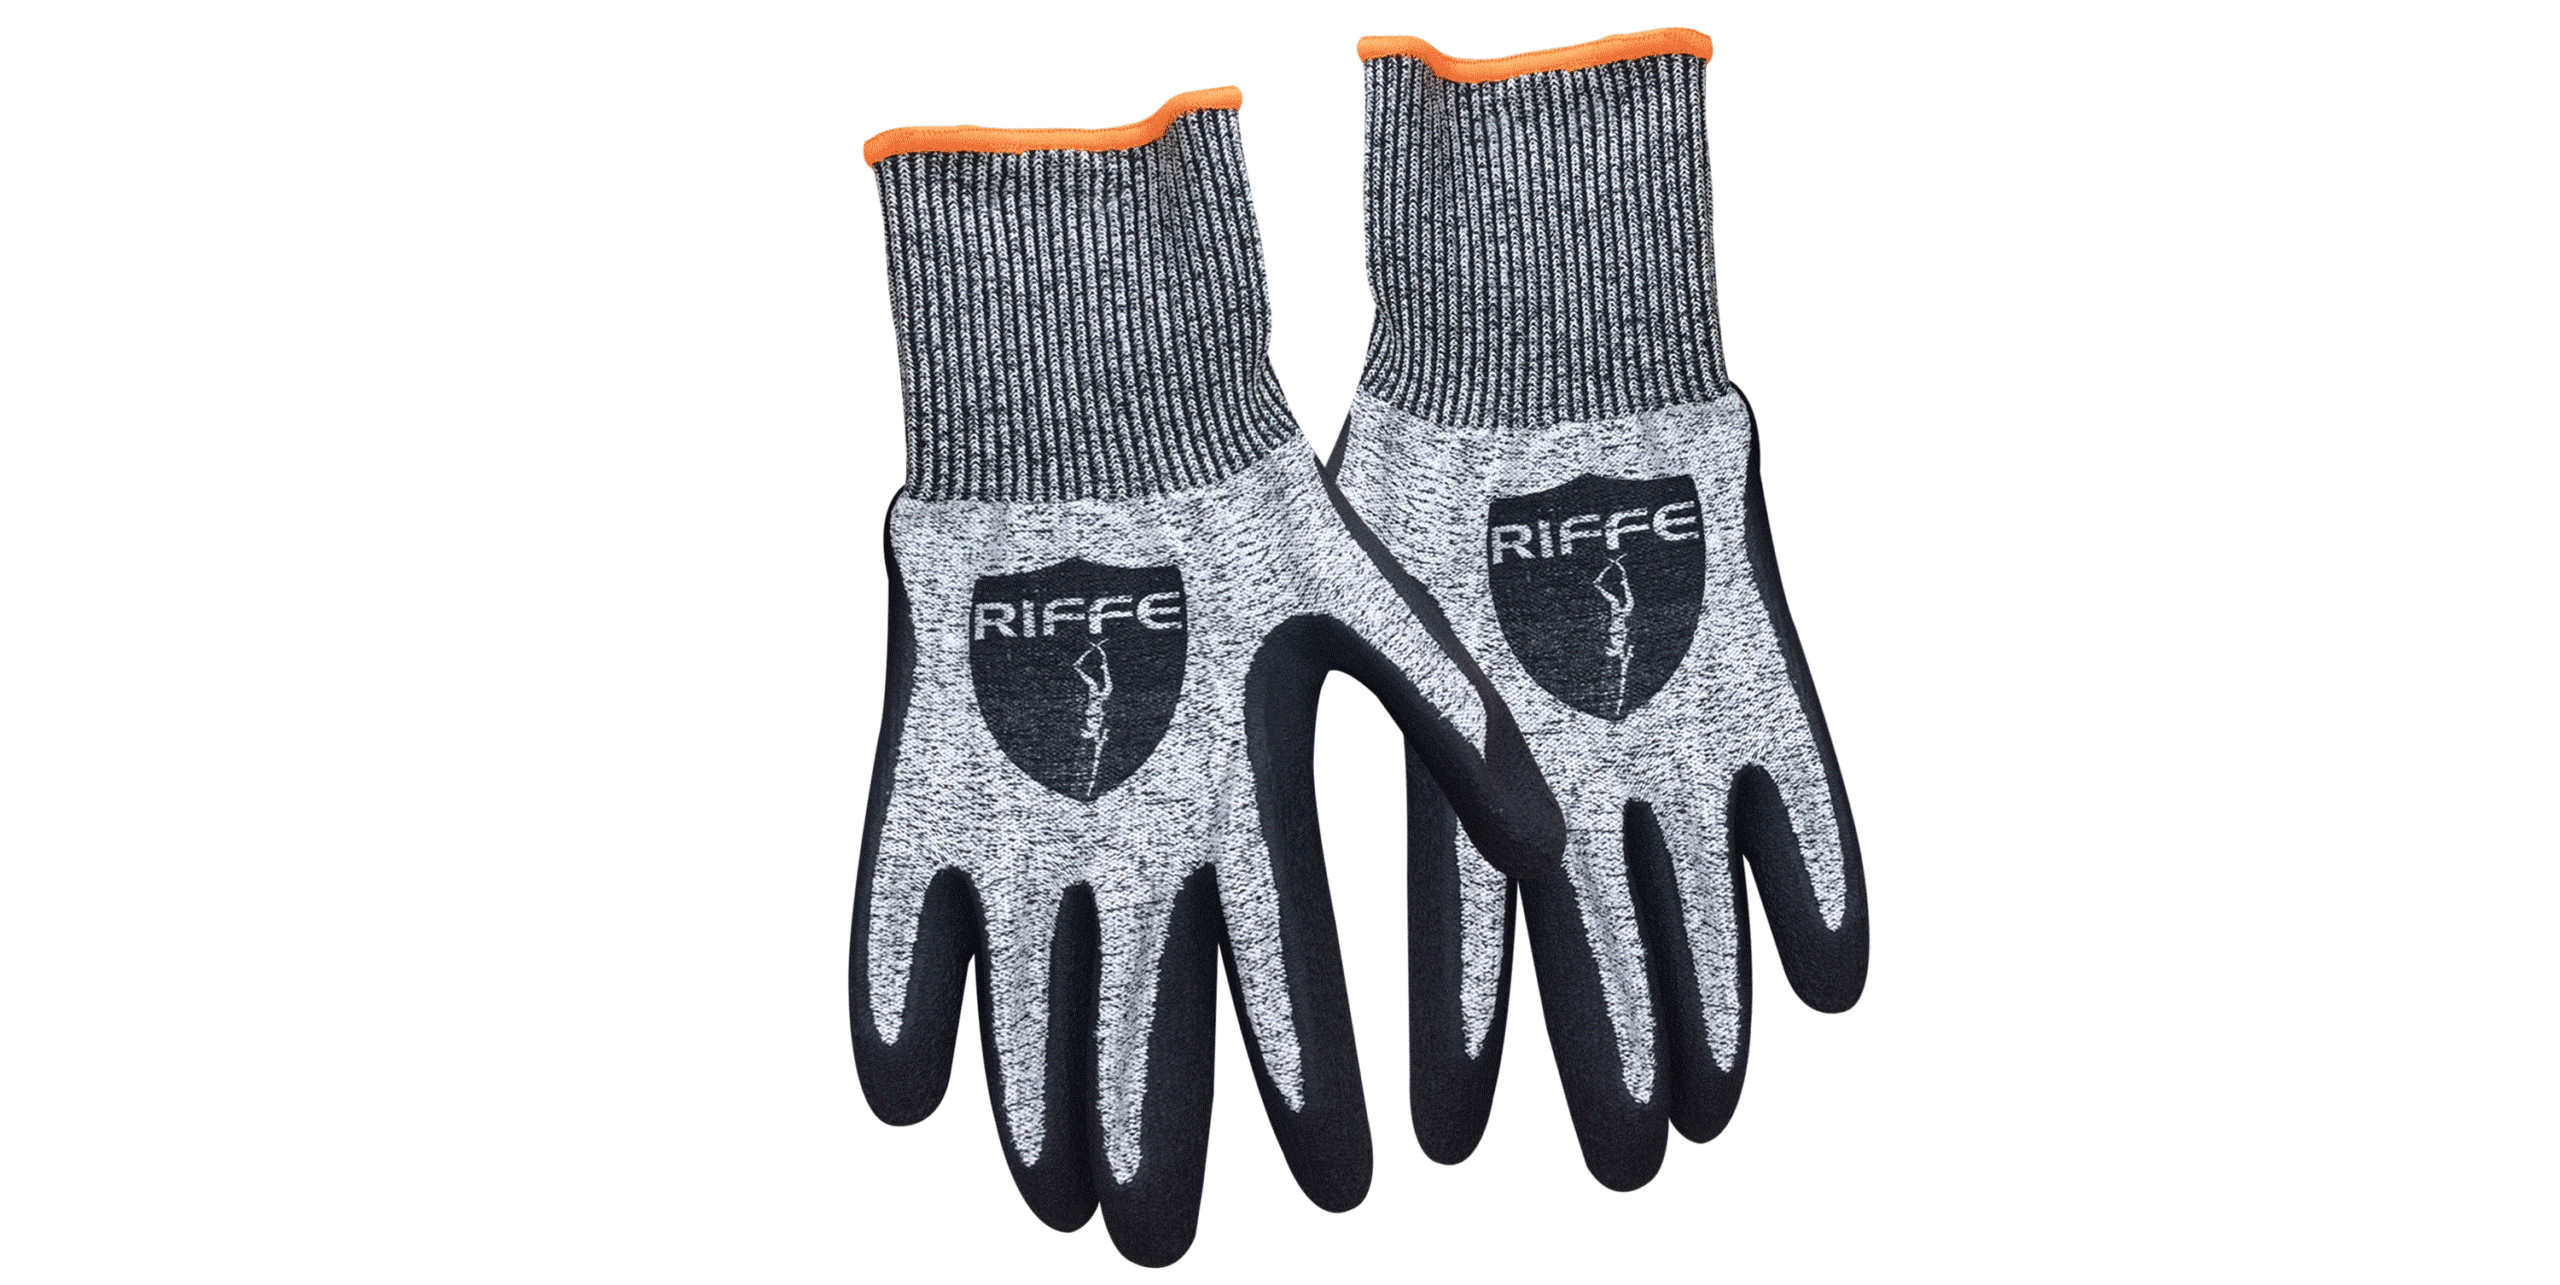 Riffe Holdfast High Performance Cut Resistant Glove (Size: XL)